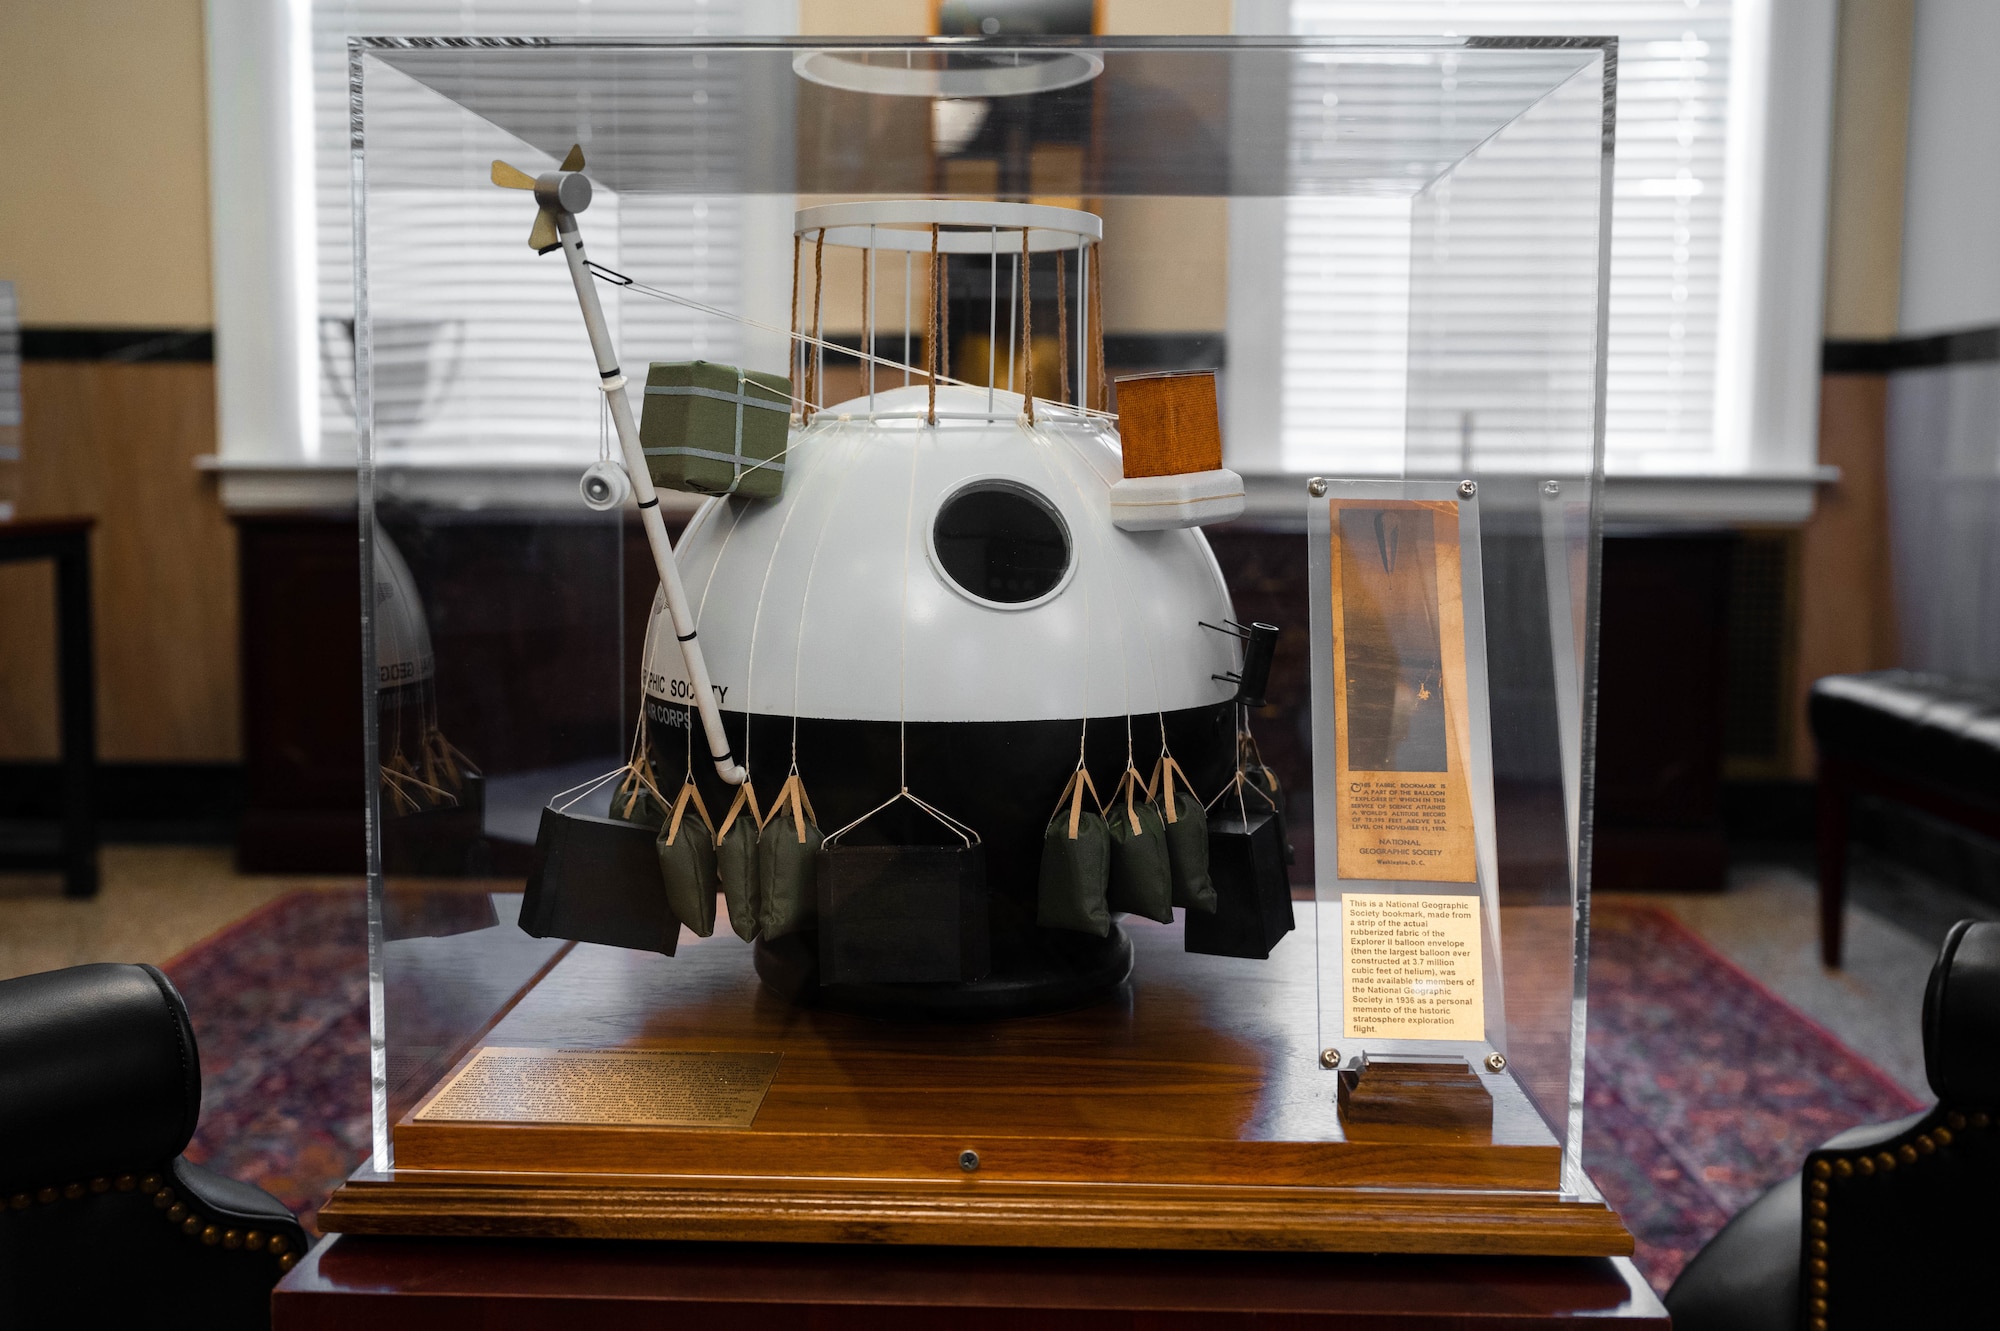 A model of the U.S. Army Air Corps Explorer II balloon sits on display at the 375th Air Mobility Wing headquarters building on March 6, 2023. Marc Hornkohl of the American Model Builders and Kris Matthews, 375th AMW historian, delivered a model of the U.S. Army Air Corps Explorer II balloon to the 375th Air Mobility Wing Headquarters, adding to the collection of the wing heritage program. (U.S. Air Force photo by Airman 1st Class De’Quan Simmons)